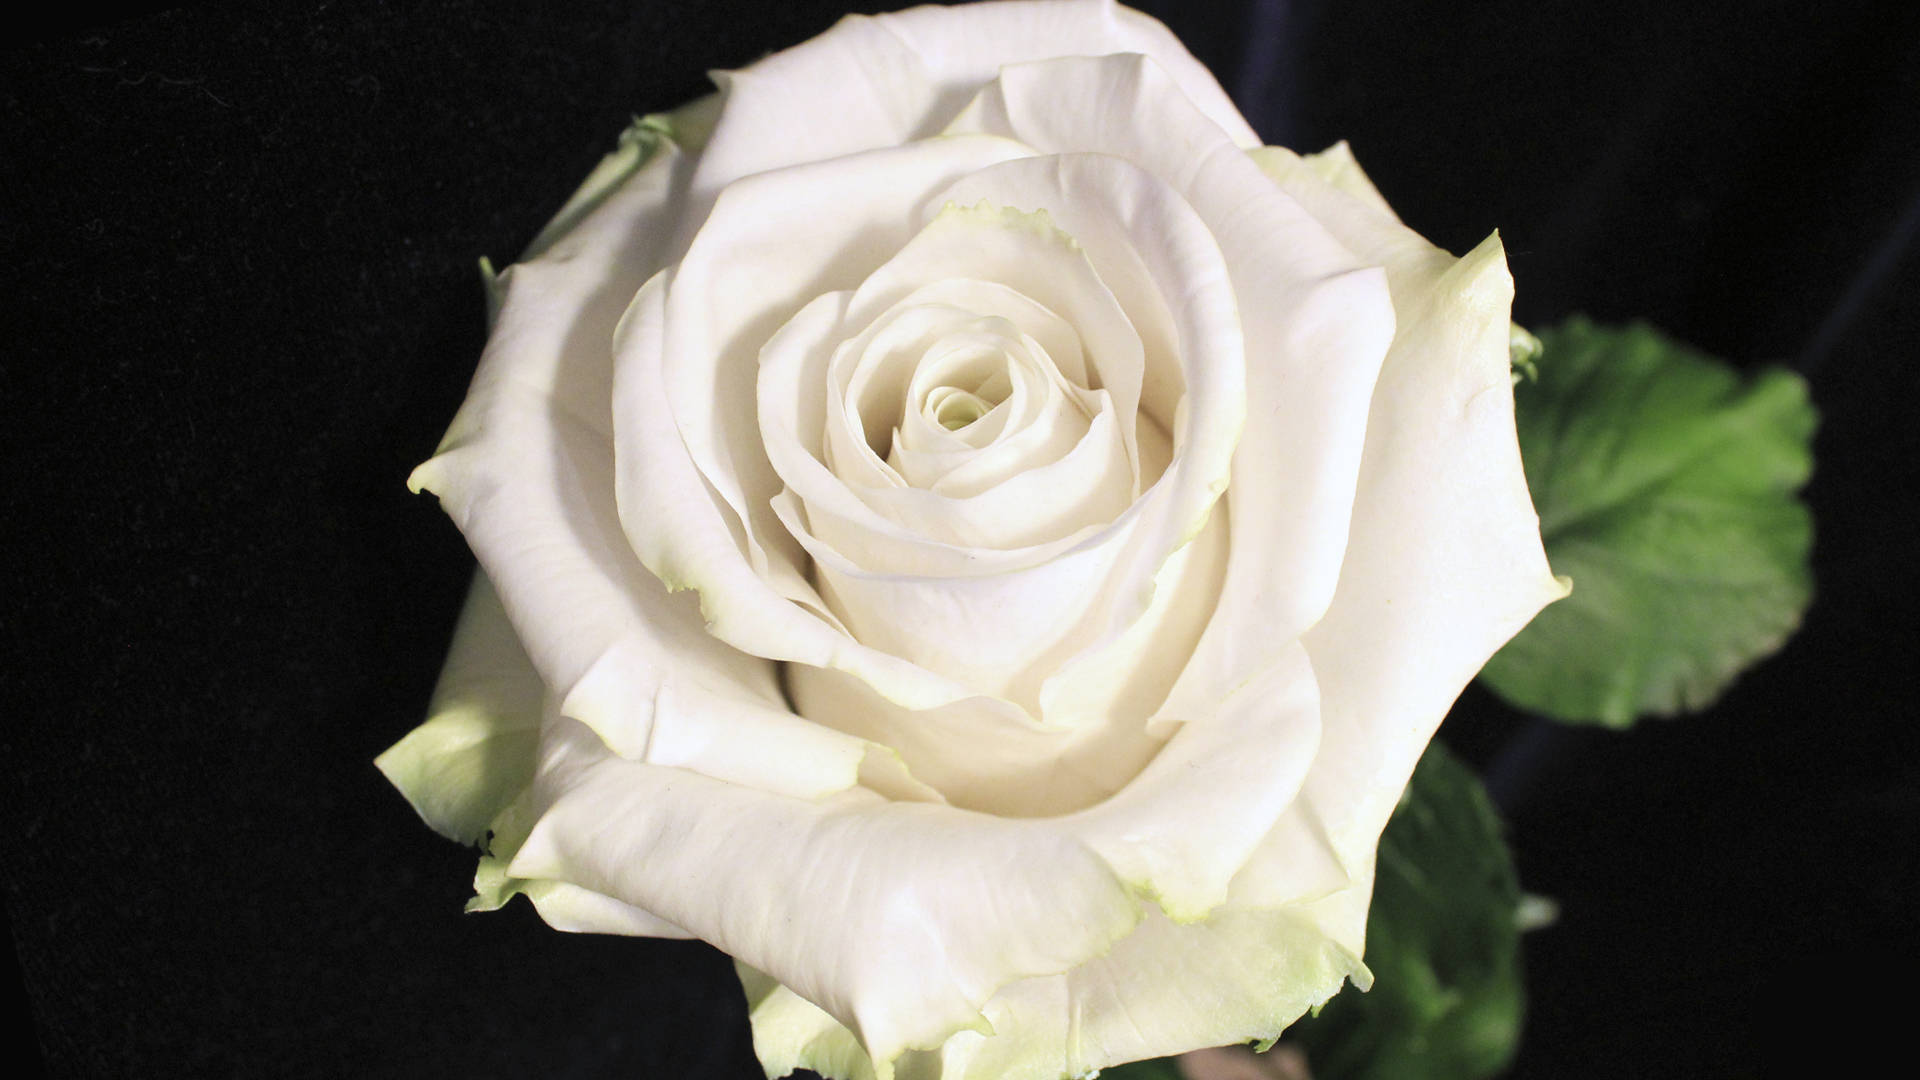 Fluorescent White Rose And Black Background Wallpaper